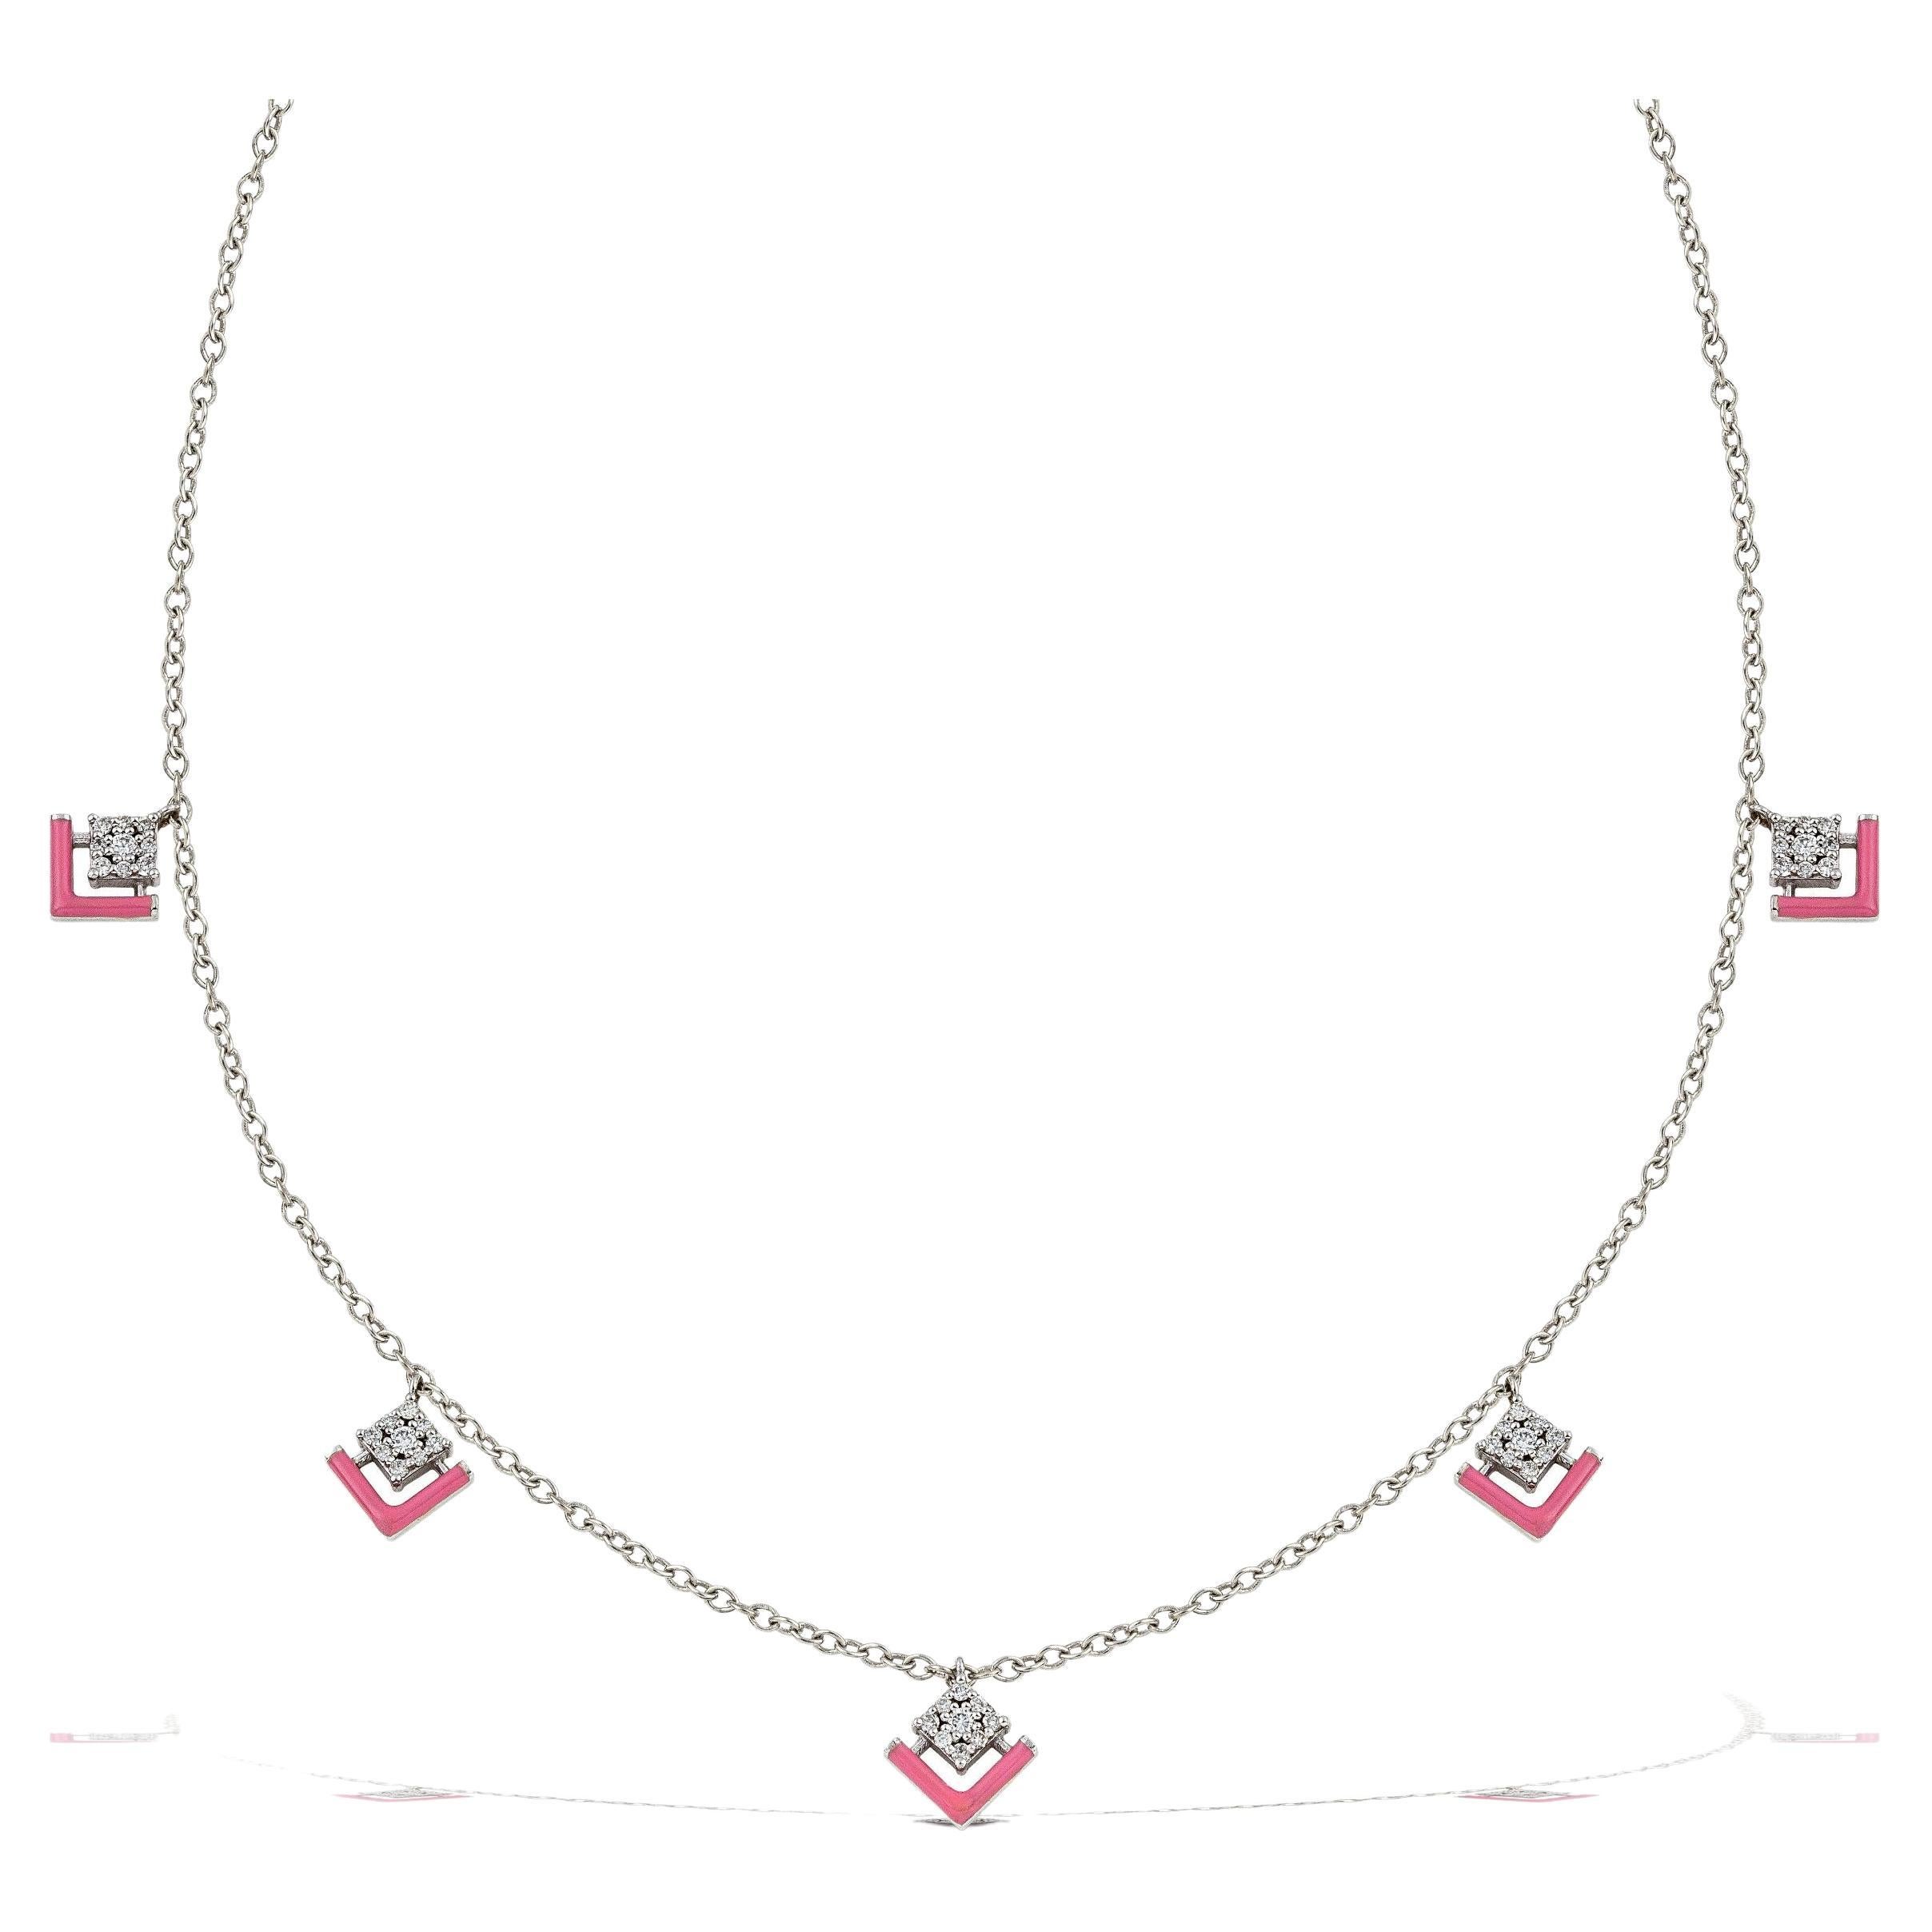 Spotlight Gold Necklace with Diamonds and Pink Enamel